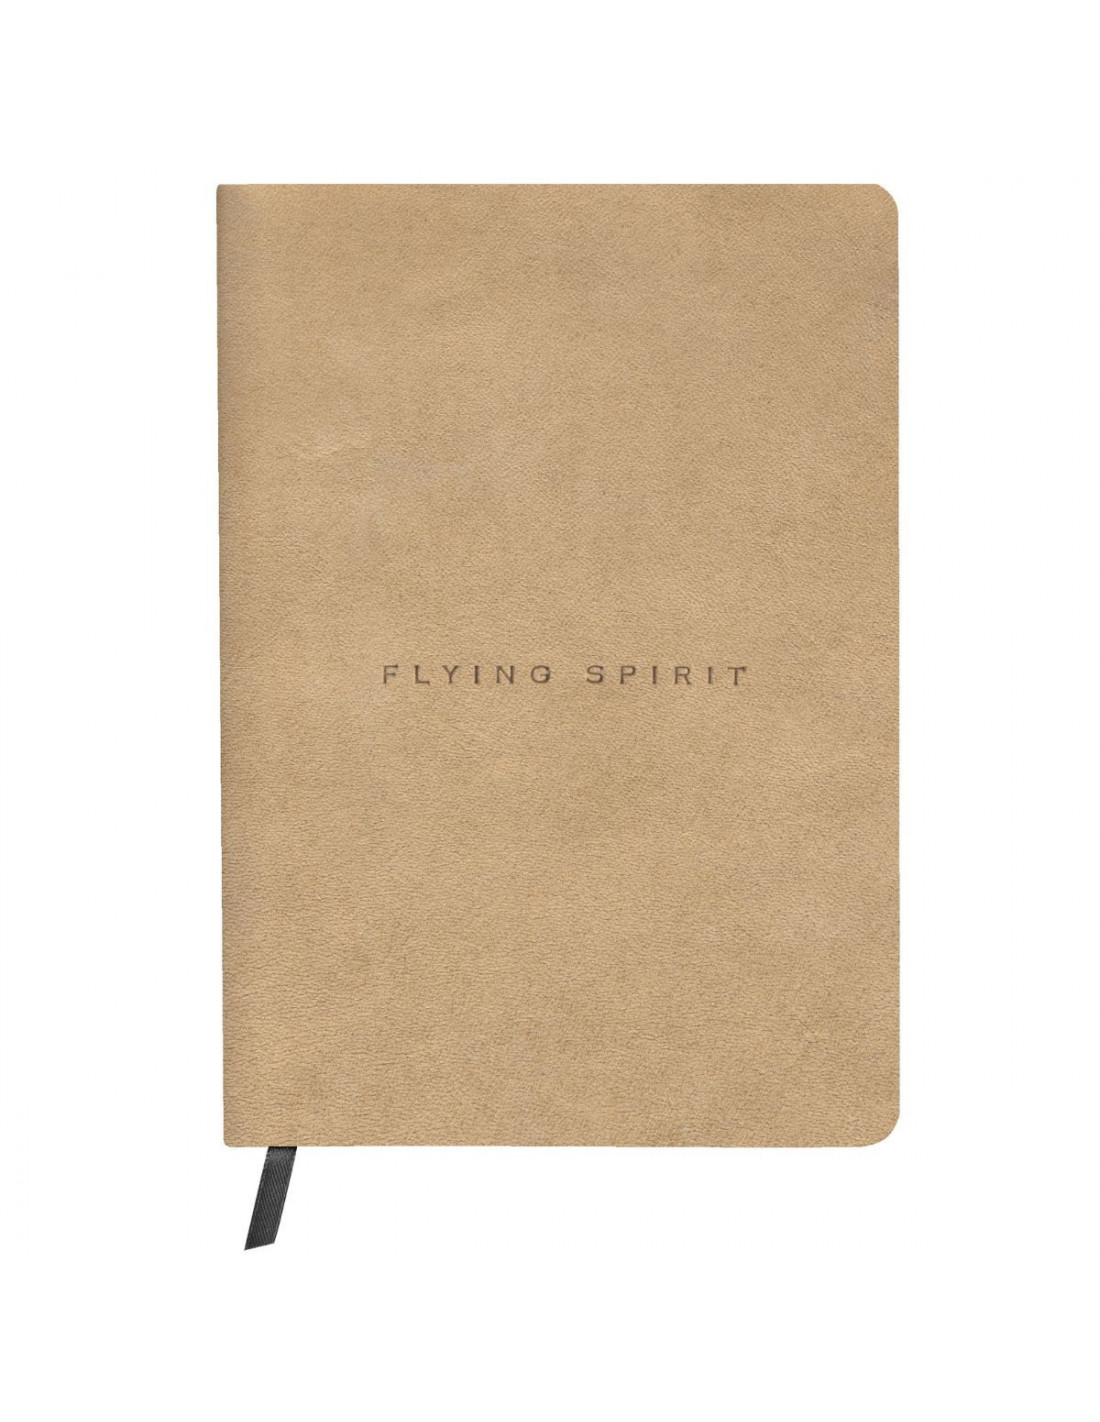 Carnet Flying Spirit Leather Collection - Cuir vieilli BEIGE - Ligné - Clairefontaine